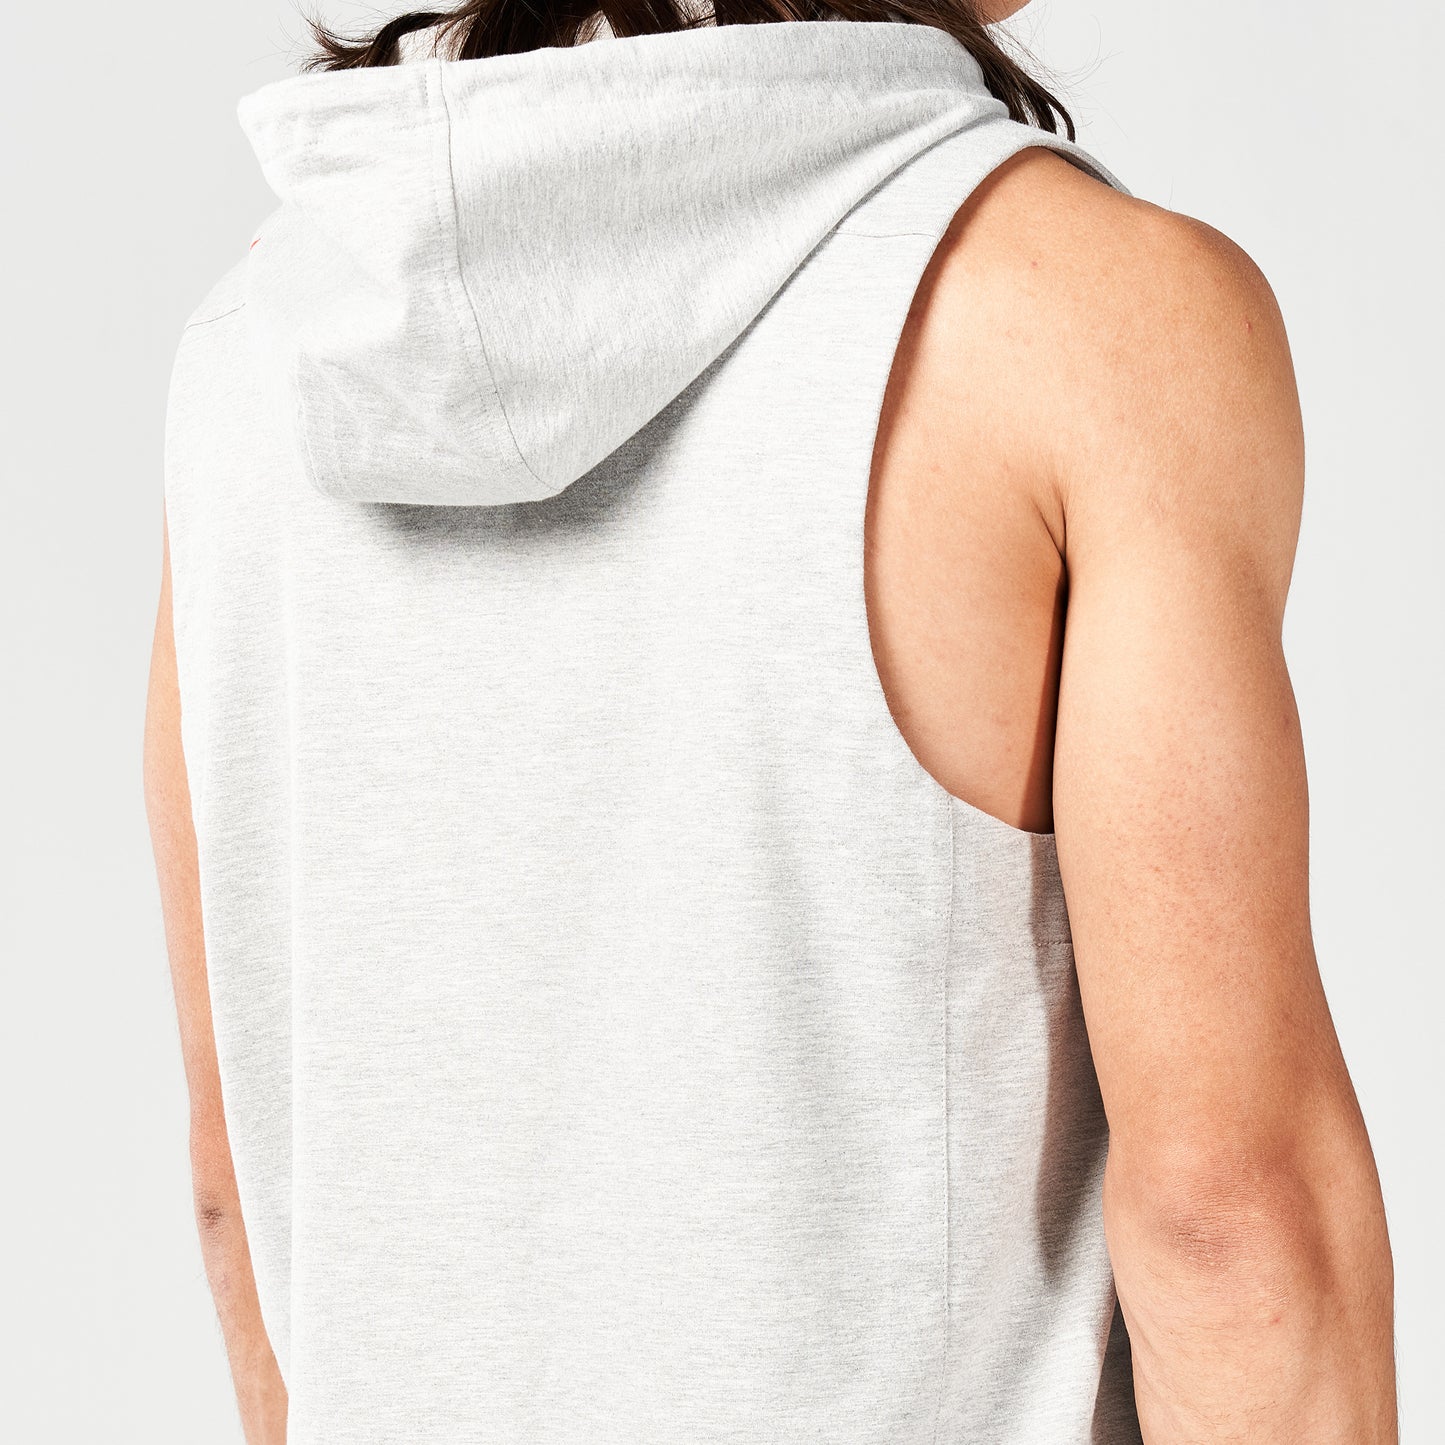 squatwolf-gym-wear-code-hooded-tank-grey-marl-workout-tank-tops-for-men